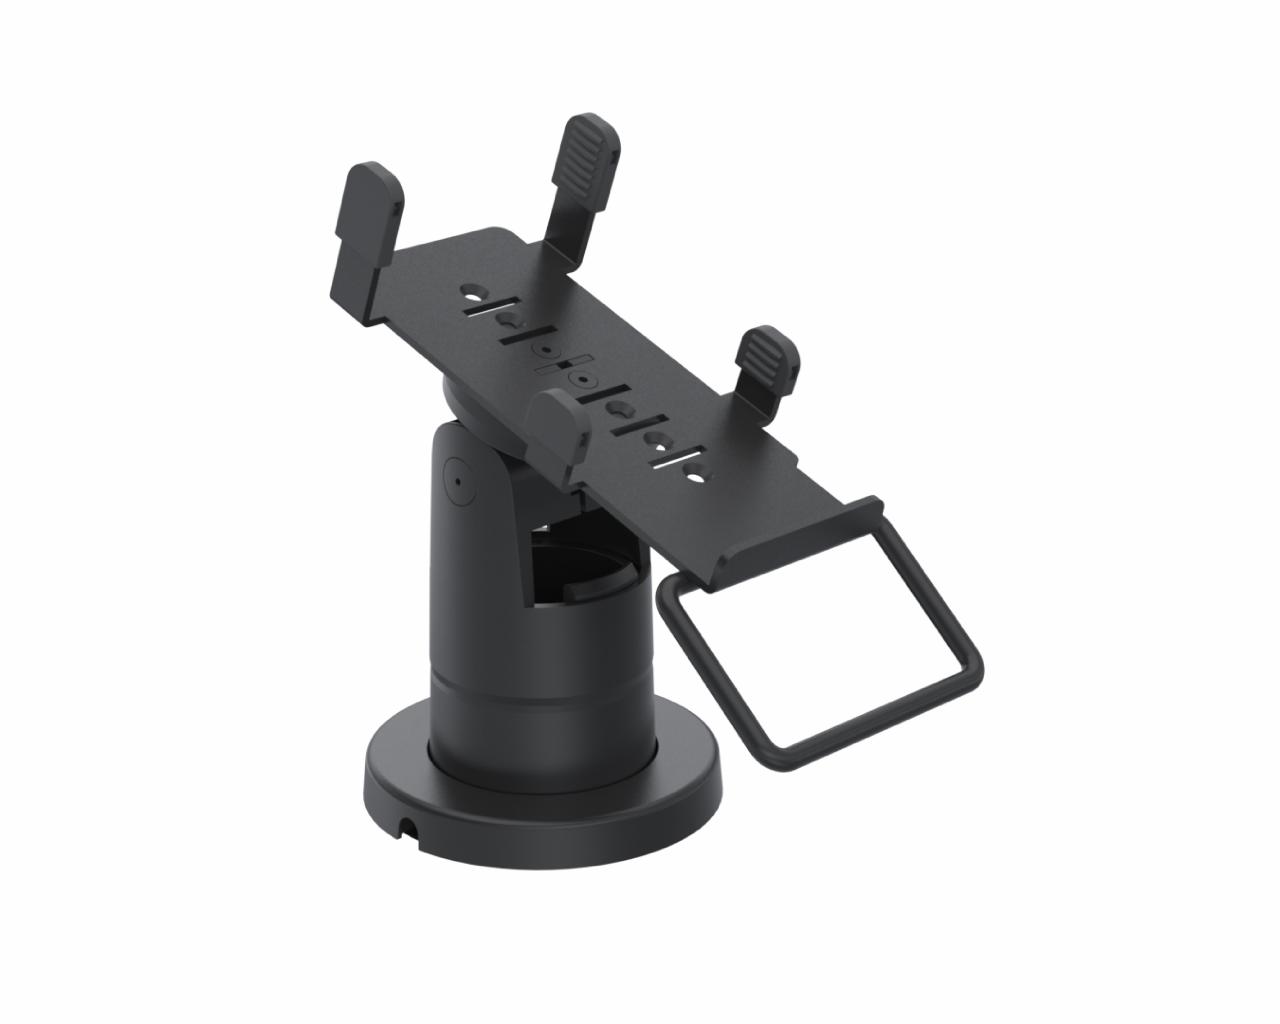 SpacePole Stack with MultiGrip plate for Verifone V400m